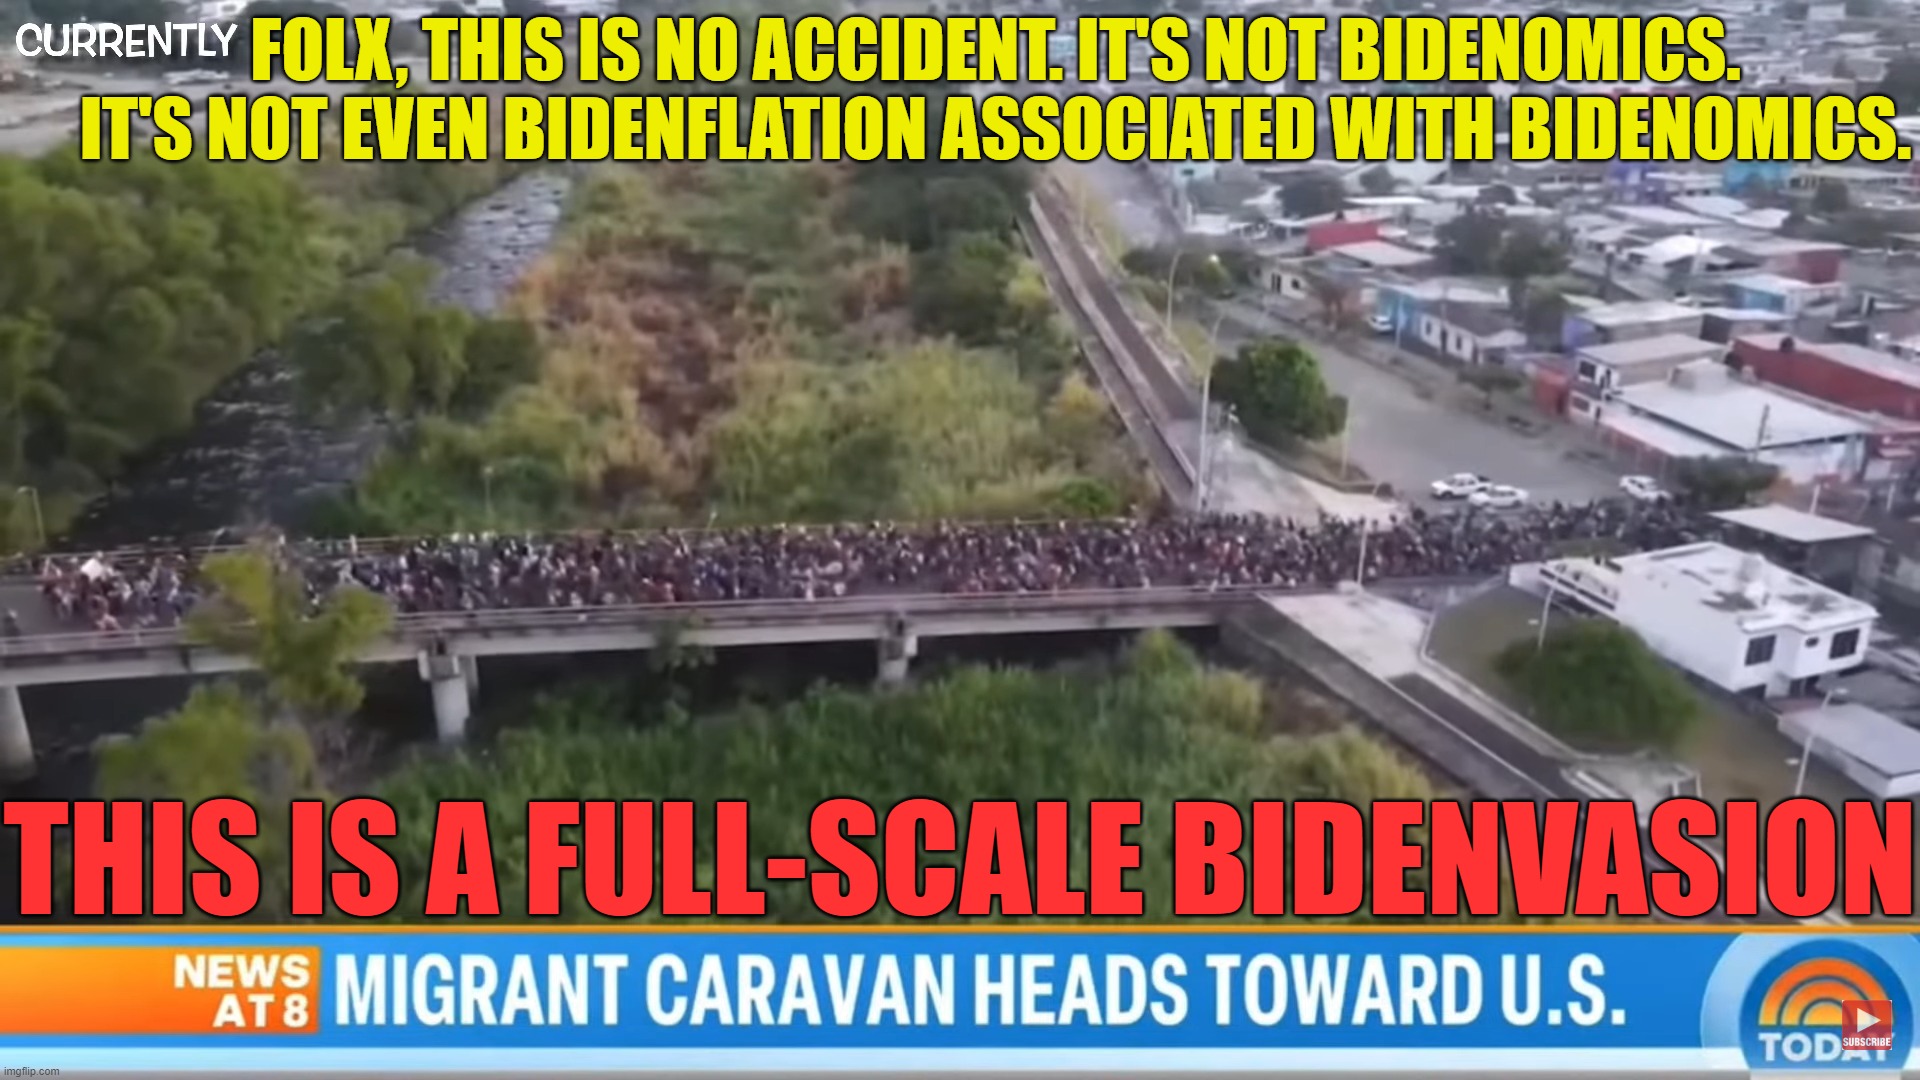 Bidenvasion | FOLX, THIS IS NO ACCIDENT. IT'S NOT BIDENOMICS. IT'S NOT EVEN BIDENFLATION ASSOCIATED WITH BIDENOMICS. THIS IS A FULL-SCALE BIDENVASION | image tagged in illegal aliens,invasion,democrats | made w/ Imgflip meme maker